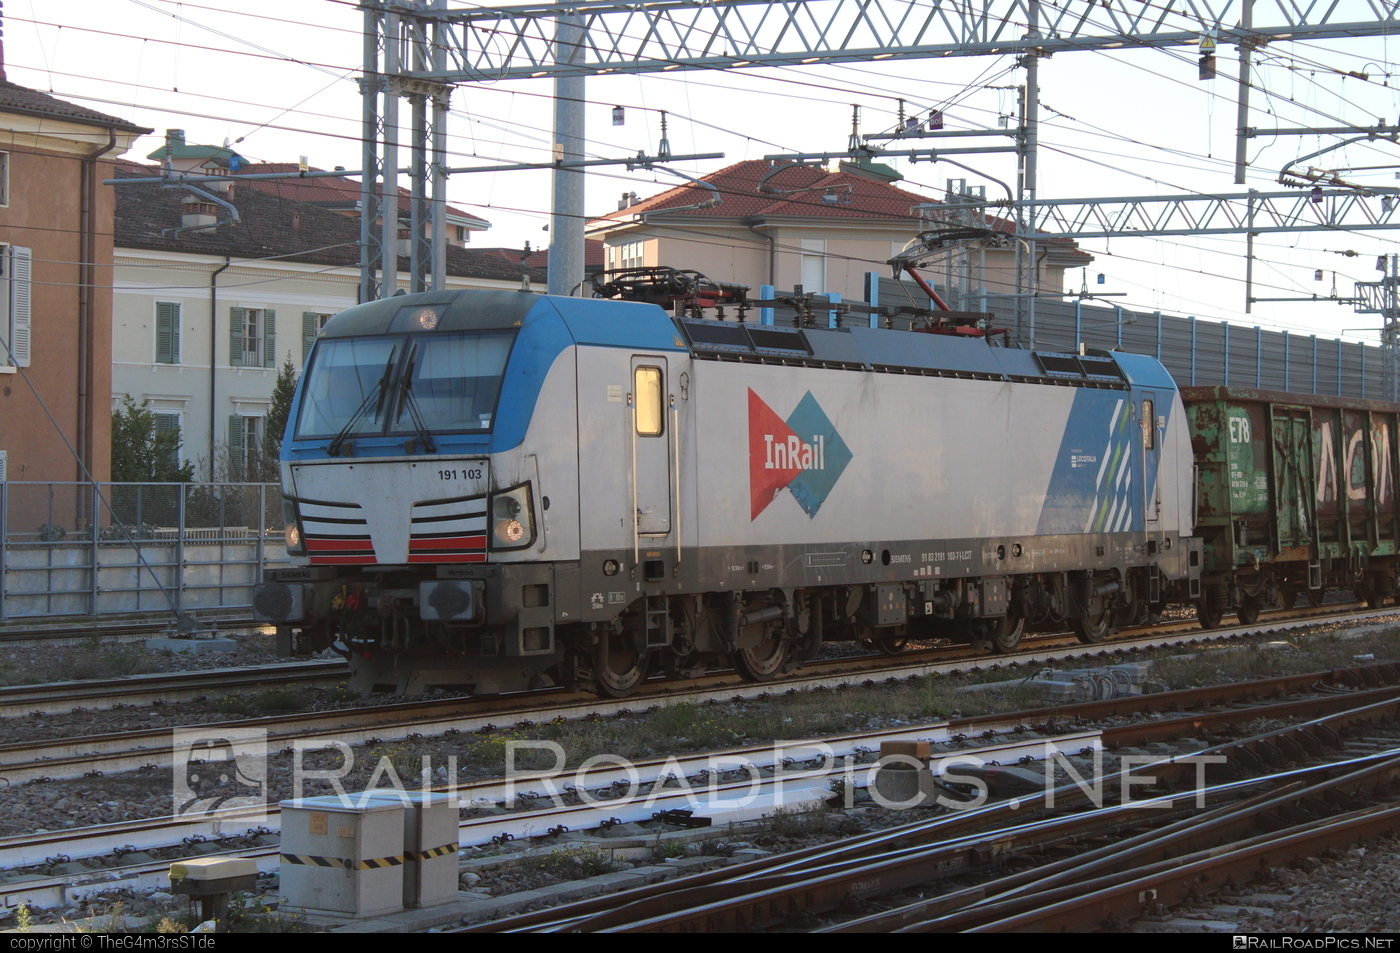 Siemens Vectron DC DPM - 191 103 operated by InRail S.p.A. #inrail #inrailSpa #locoItalia #locoItaliaSpA #siemens #siemensVectron #siemensVectronDCDPM #vectron #vectronDCDPM